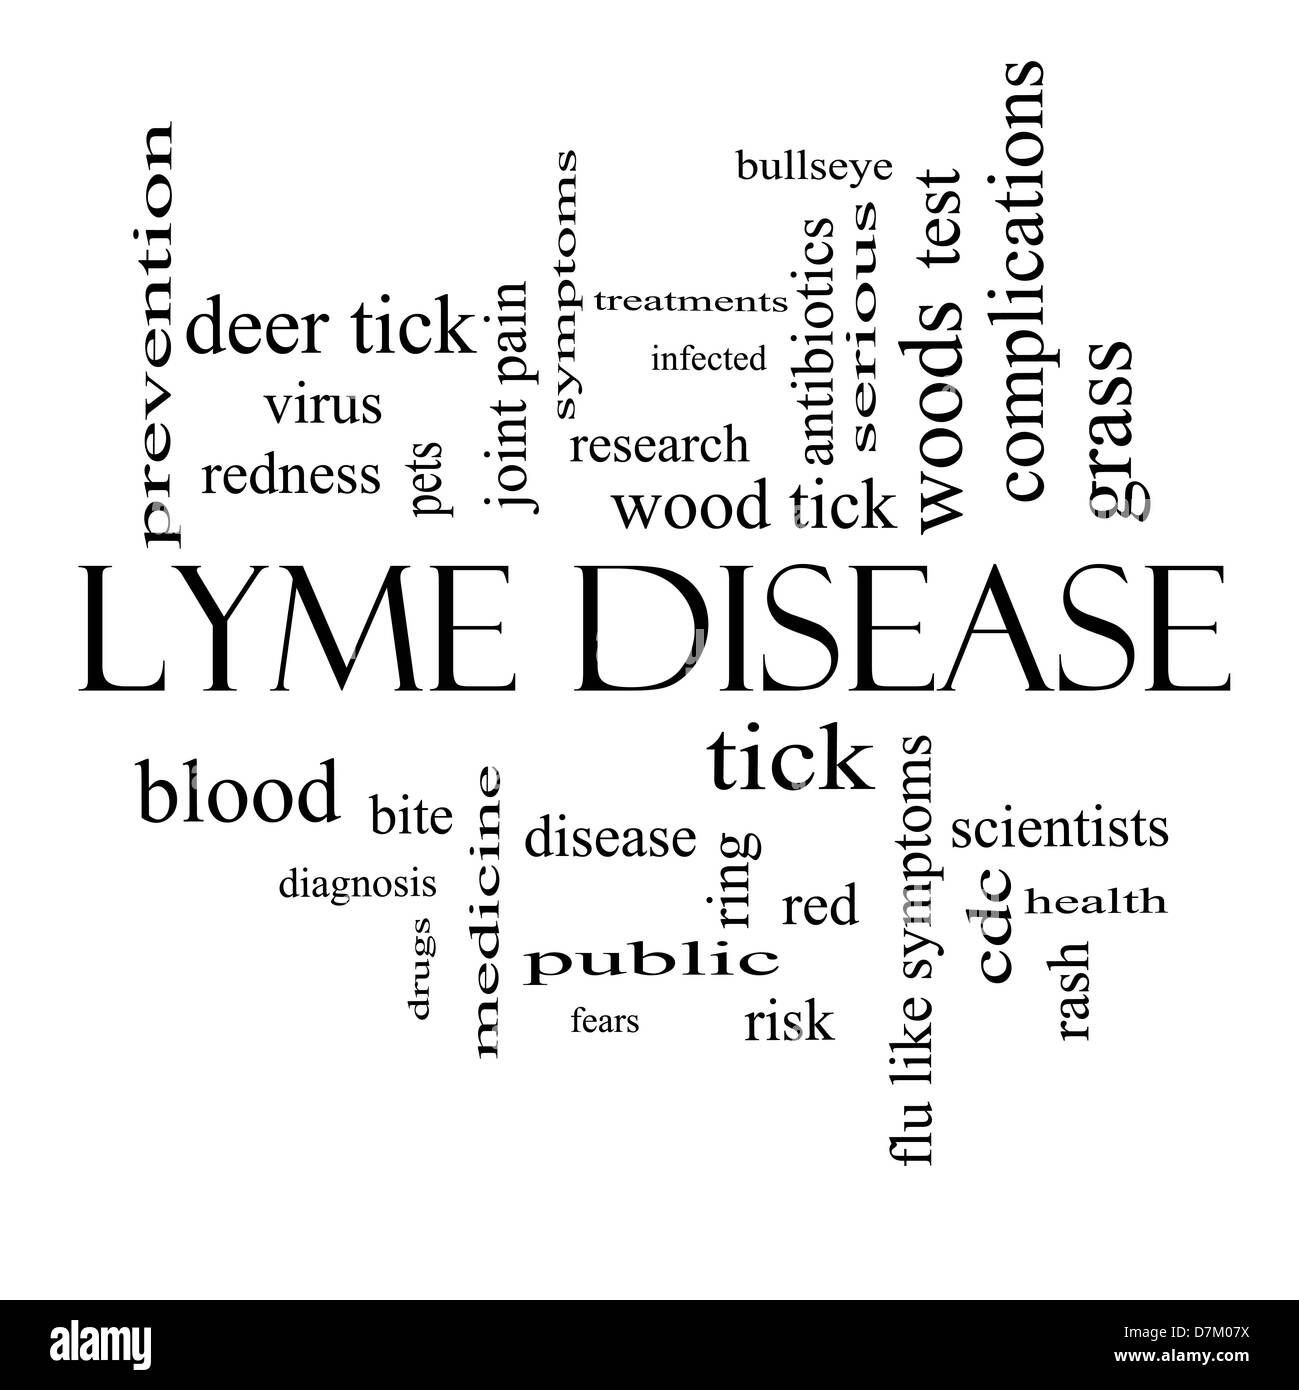 Lyme Disease Word Cloud Concept in black and white with great terms such as deer tick, blood, bullseye, bite and more. Stock Photo